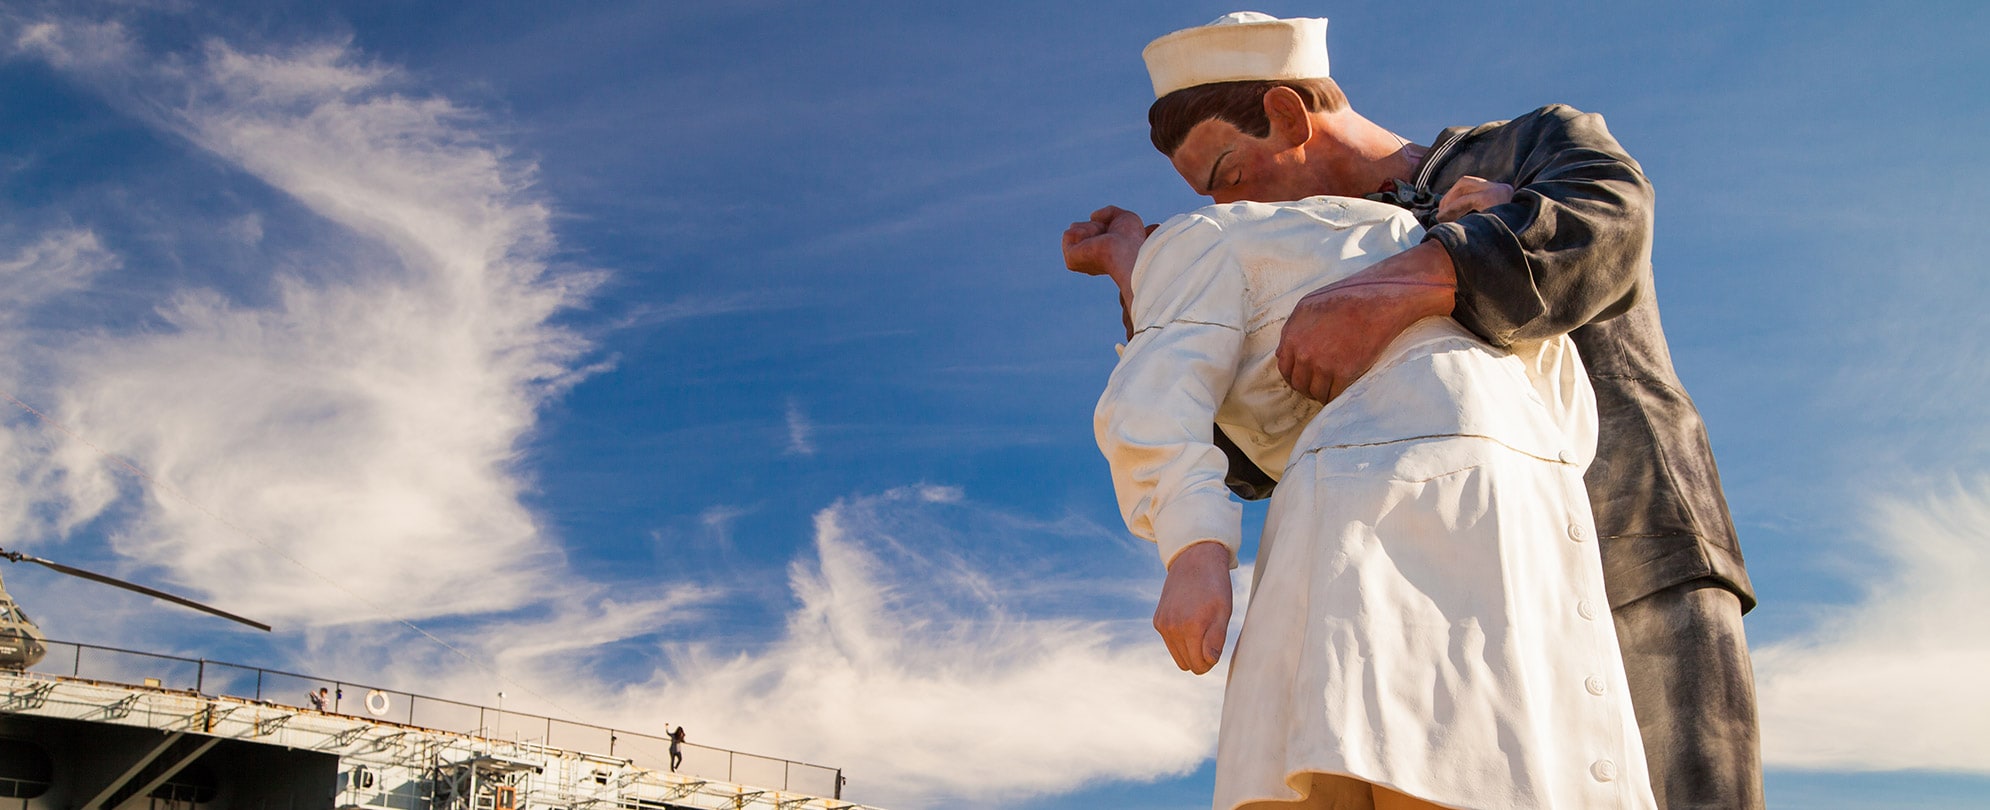 A statue of a sailor dipping and kissing a woman at the USS Midway Museum in San Diego, California.